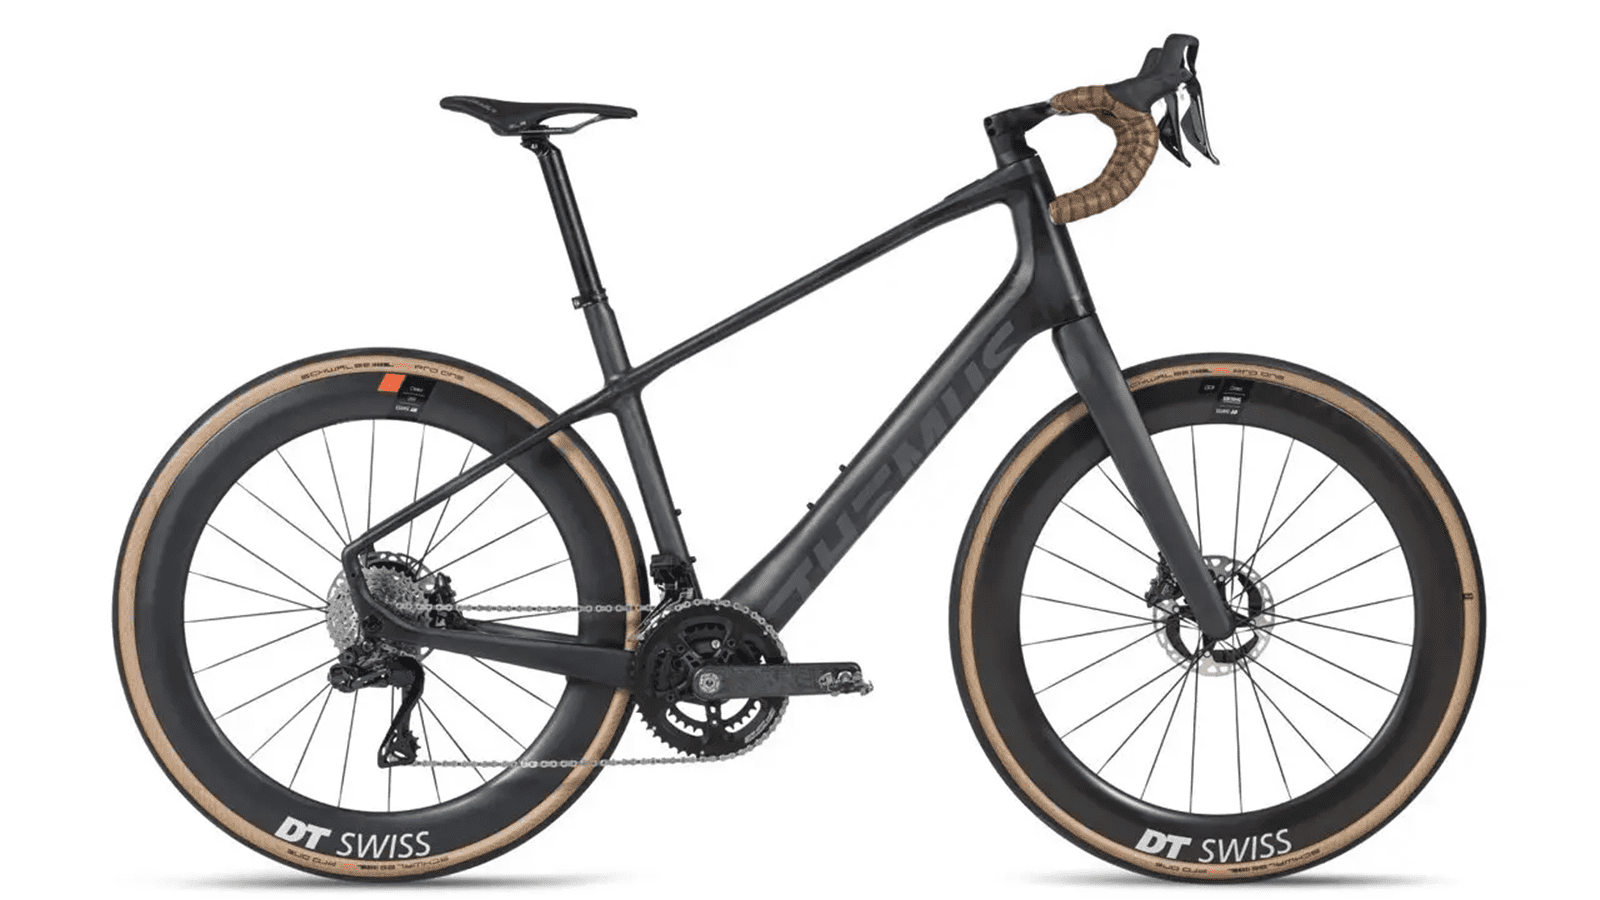 Lightest e-bike side view of the Swissrider in charcoal